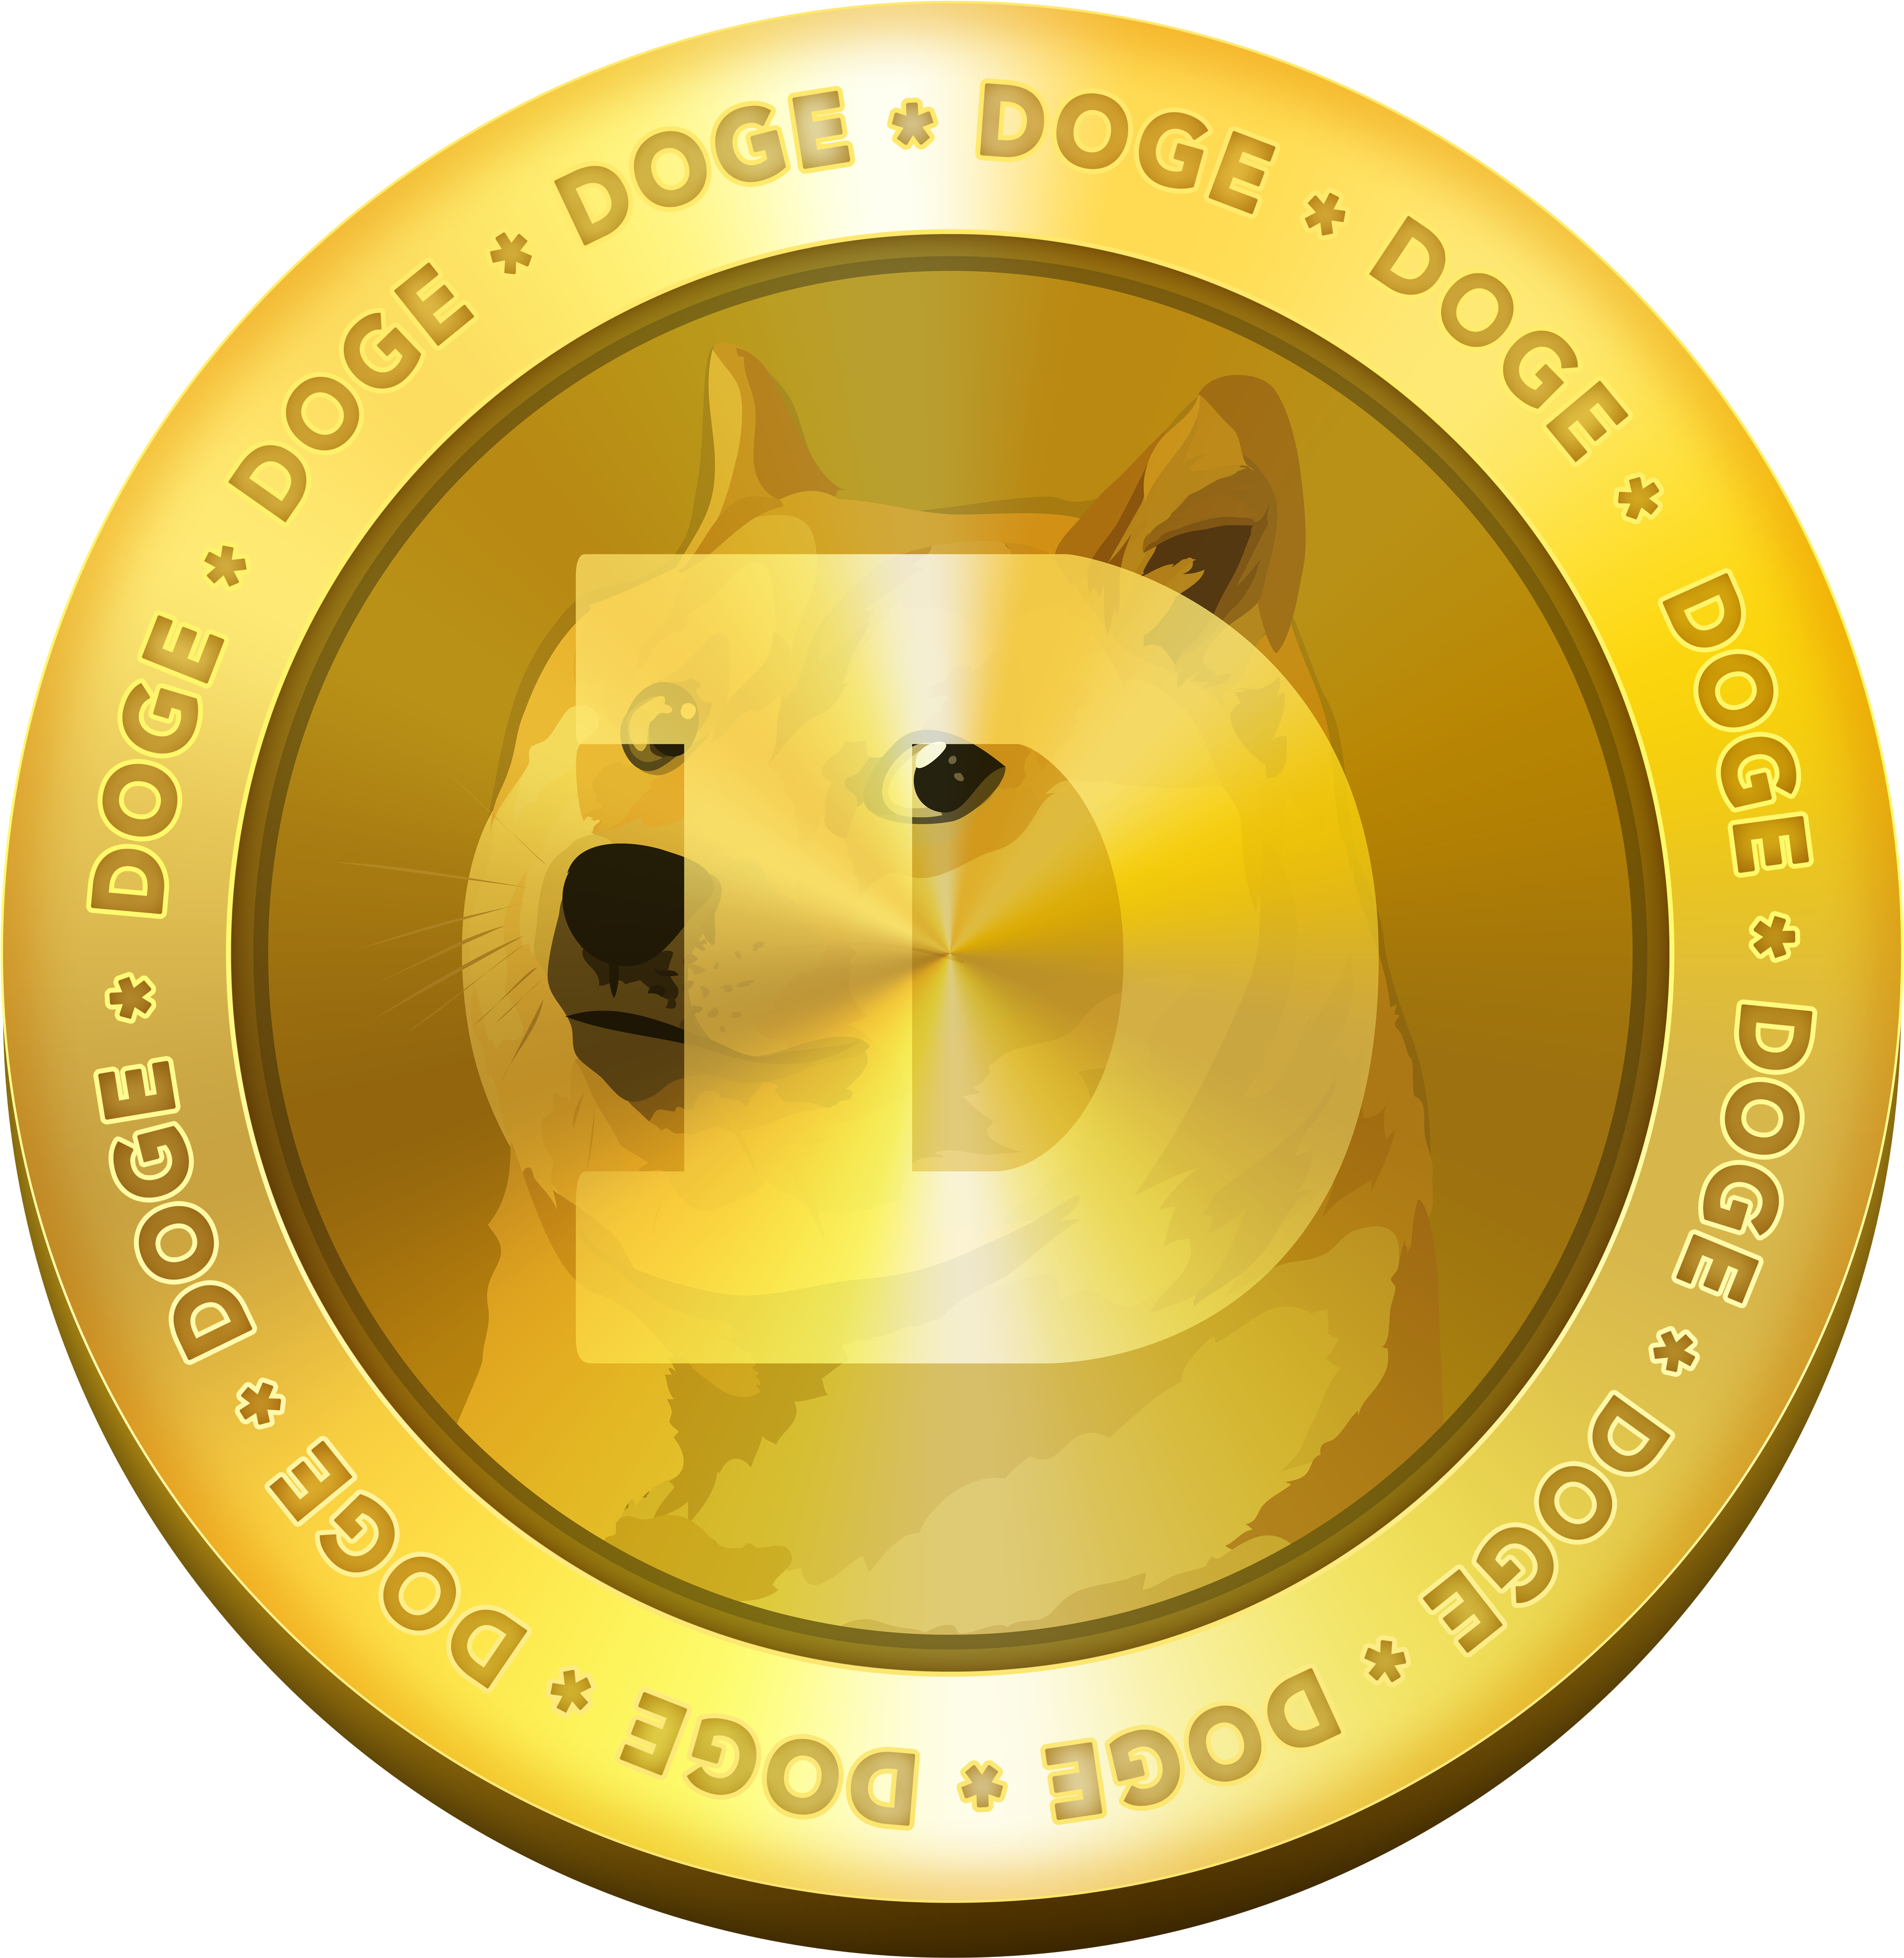 A Gold Coin With A Dog On It